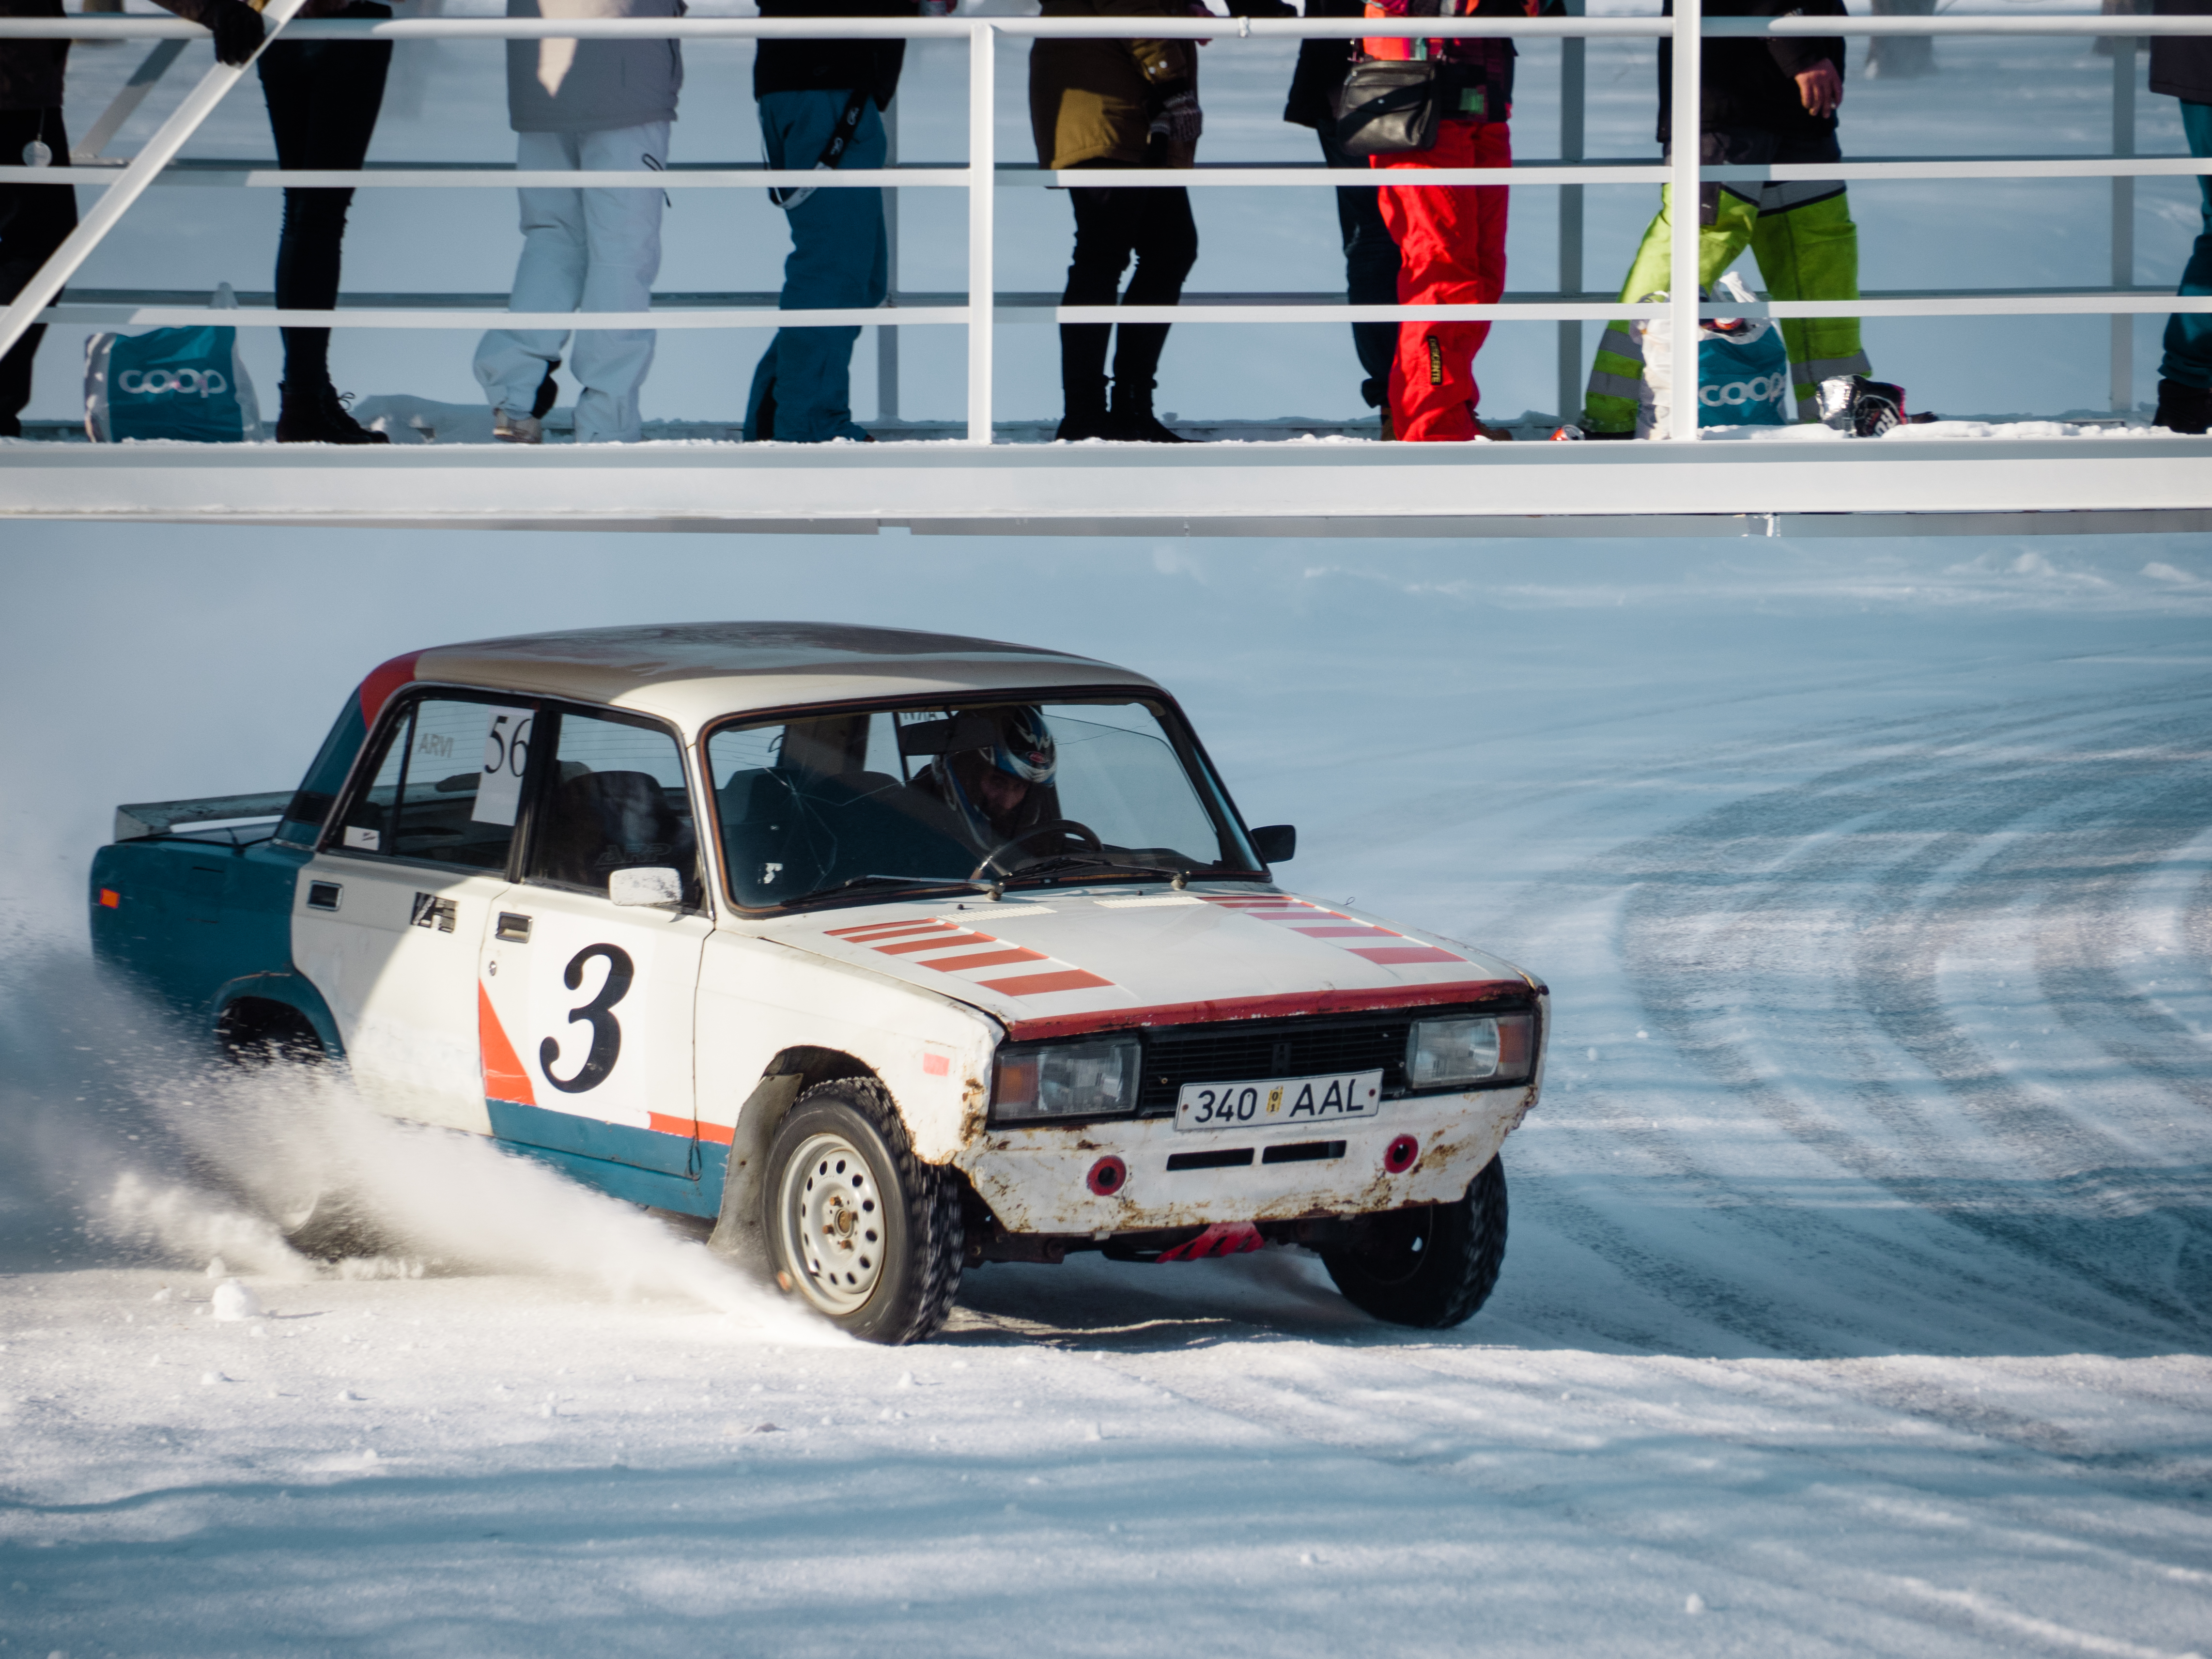 This Lada even has racing livery!